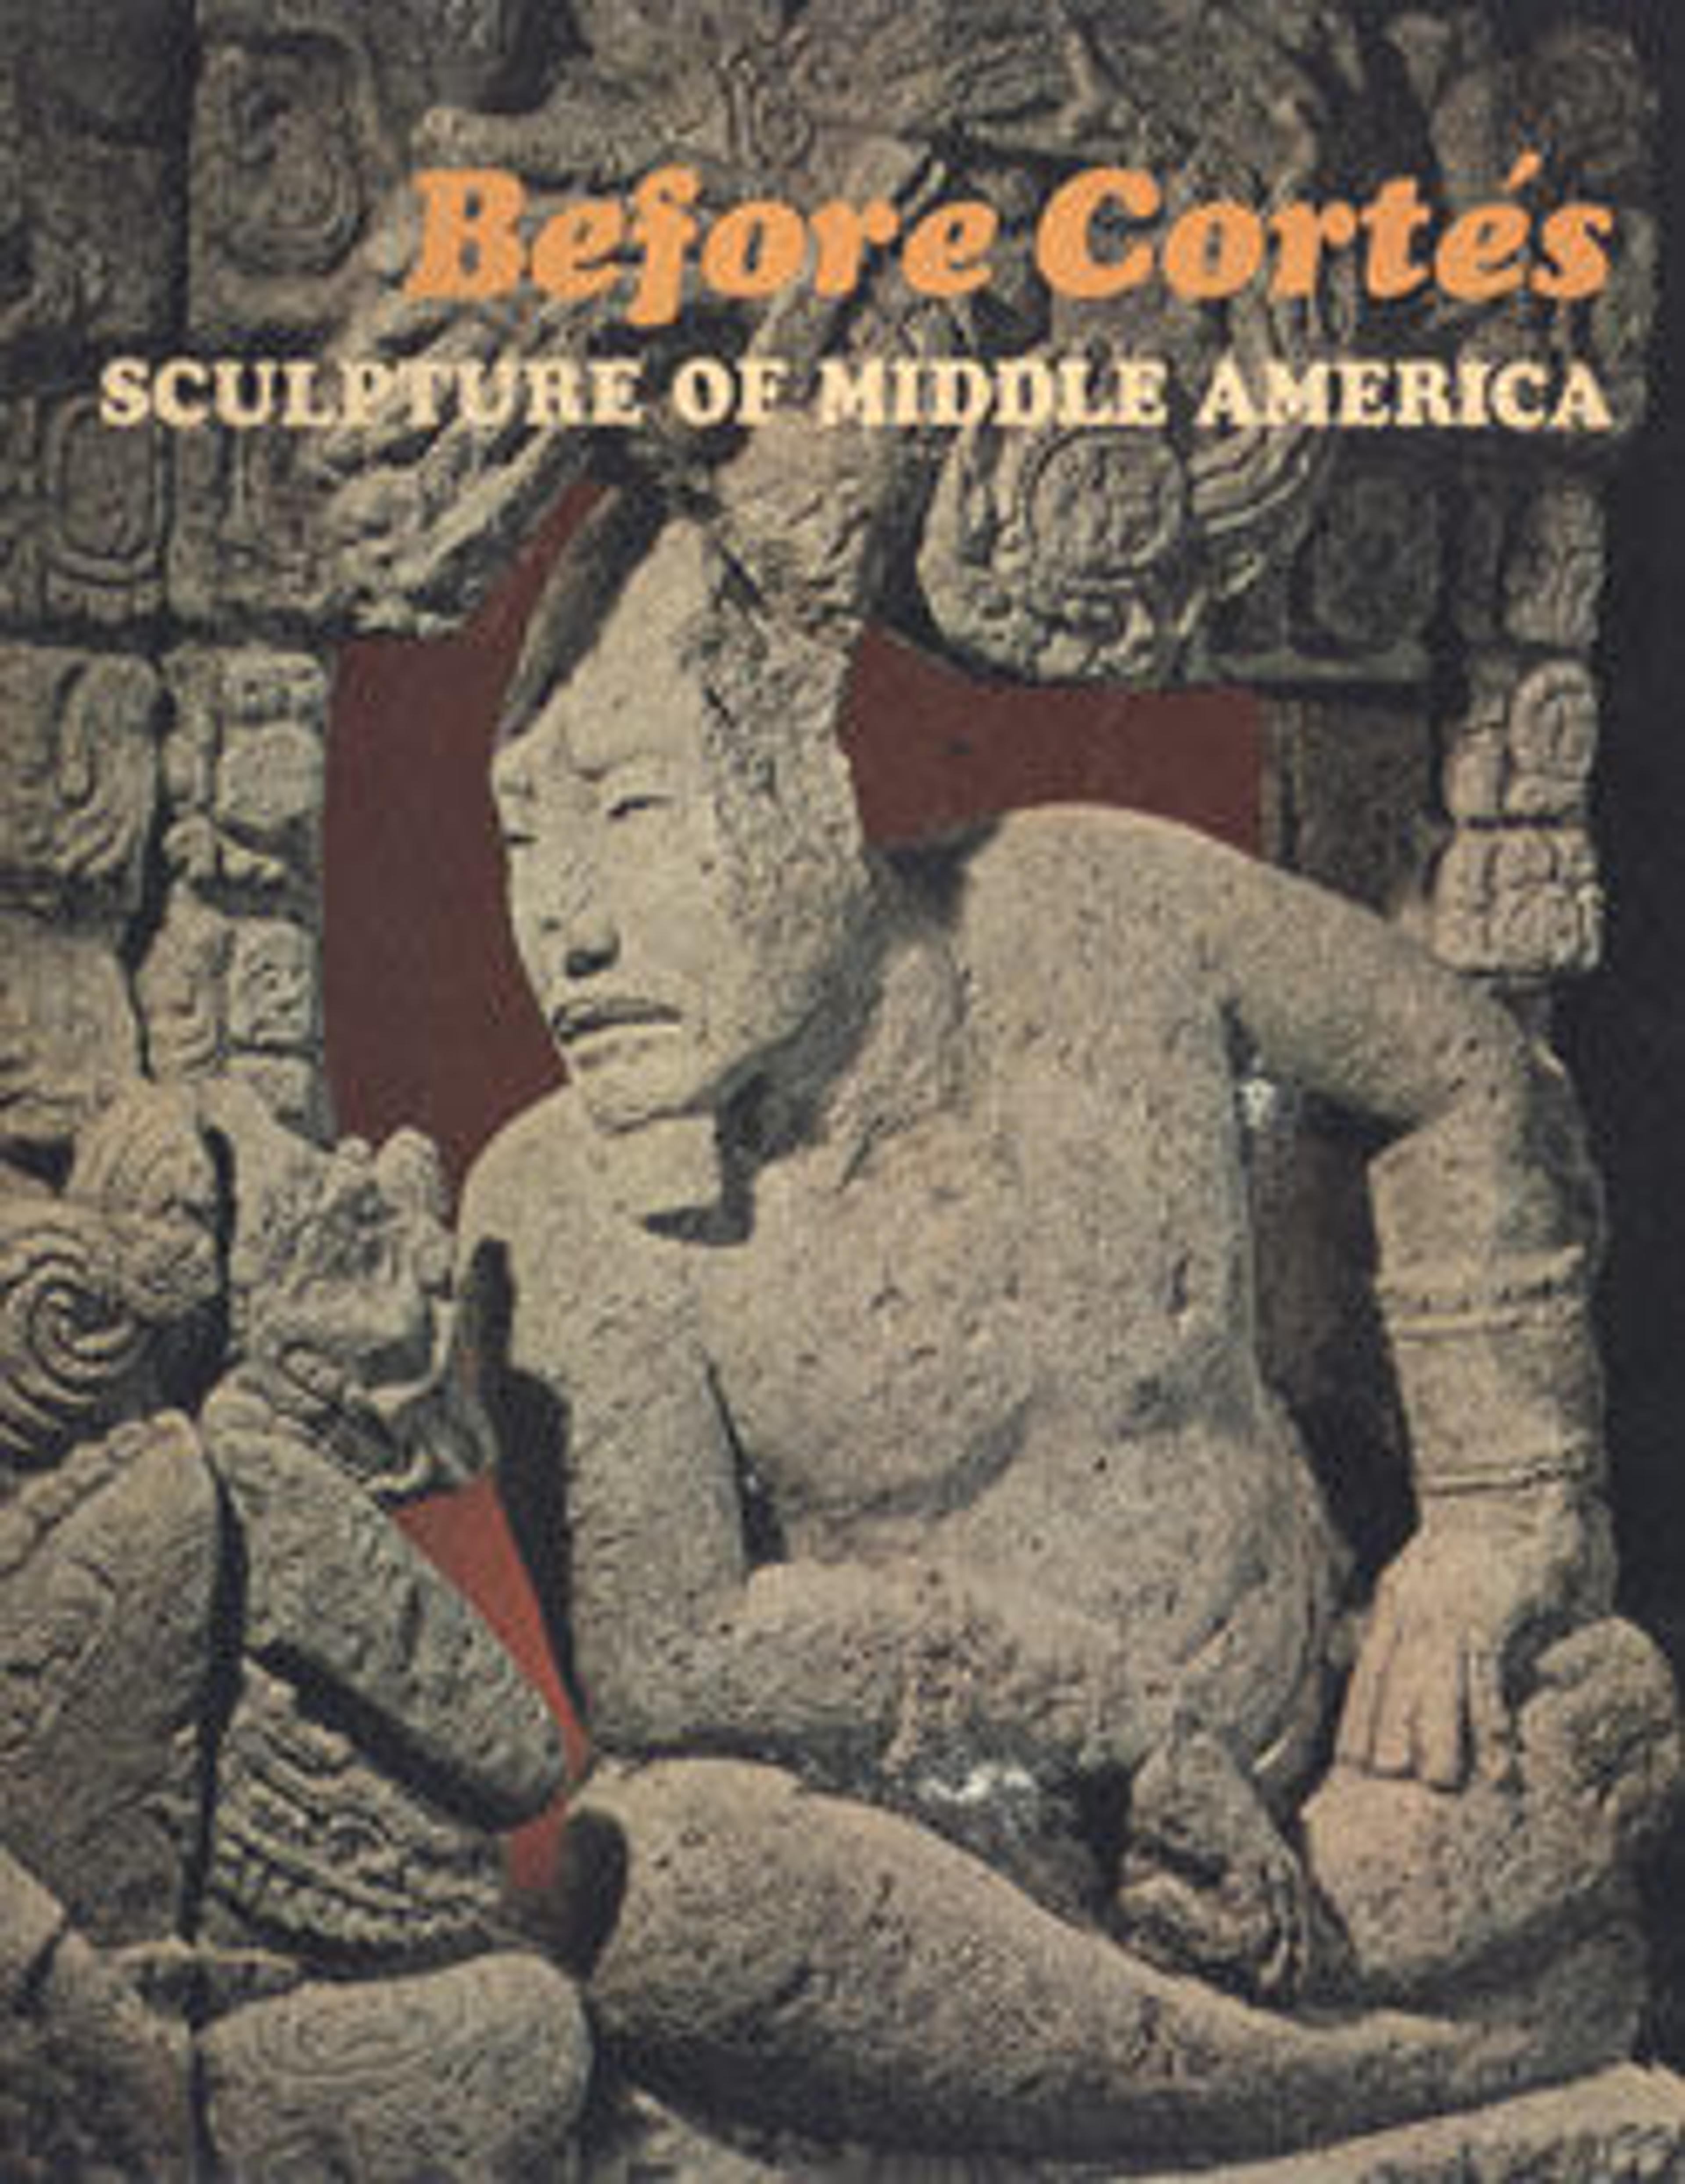 Before Cortes: Sculpture of Middle America